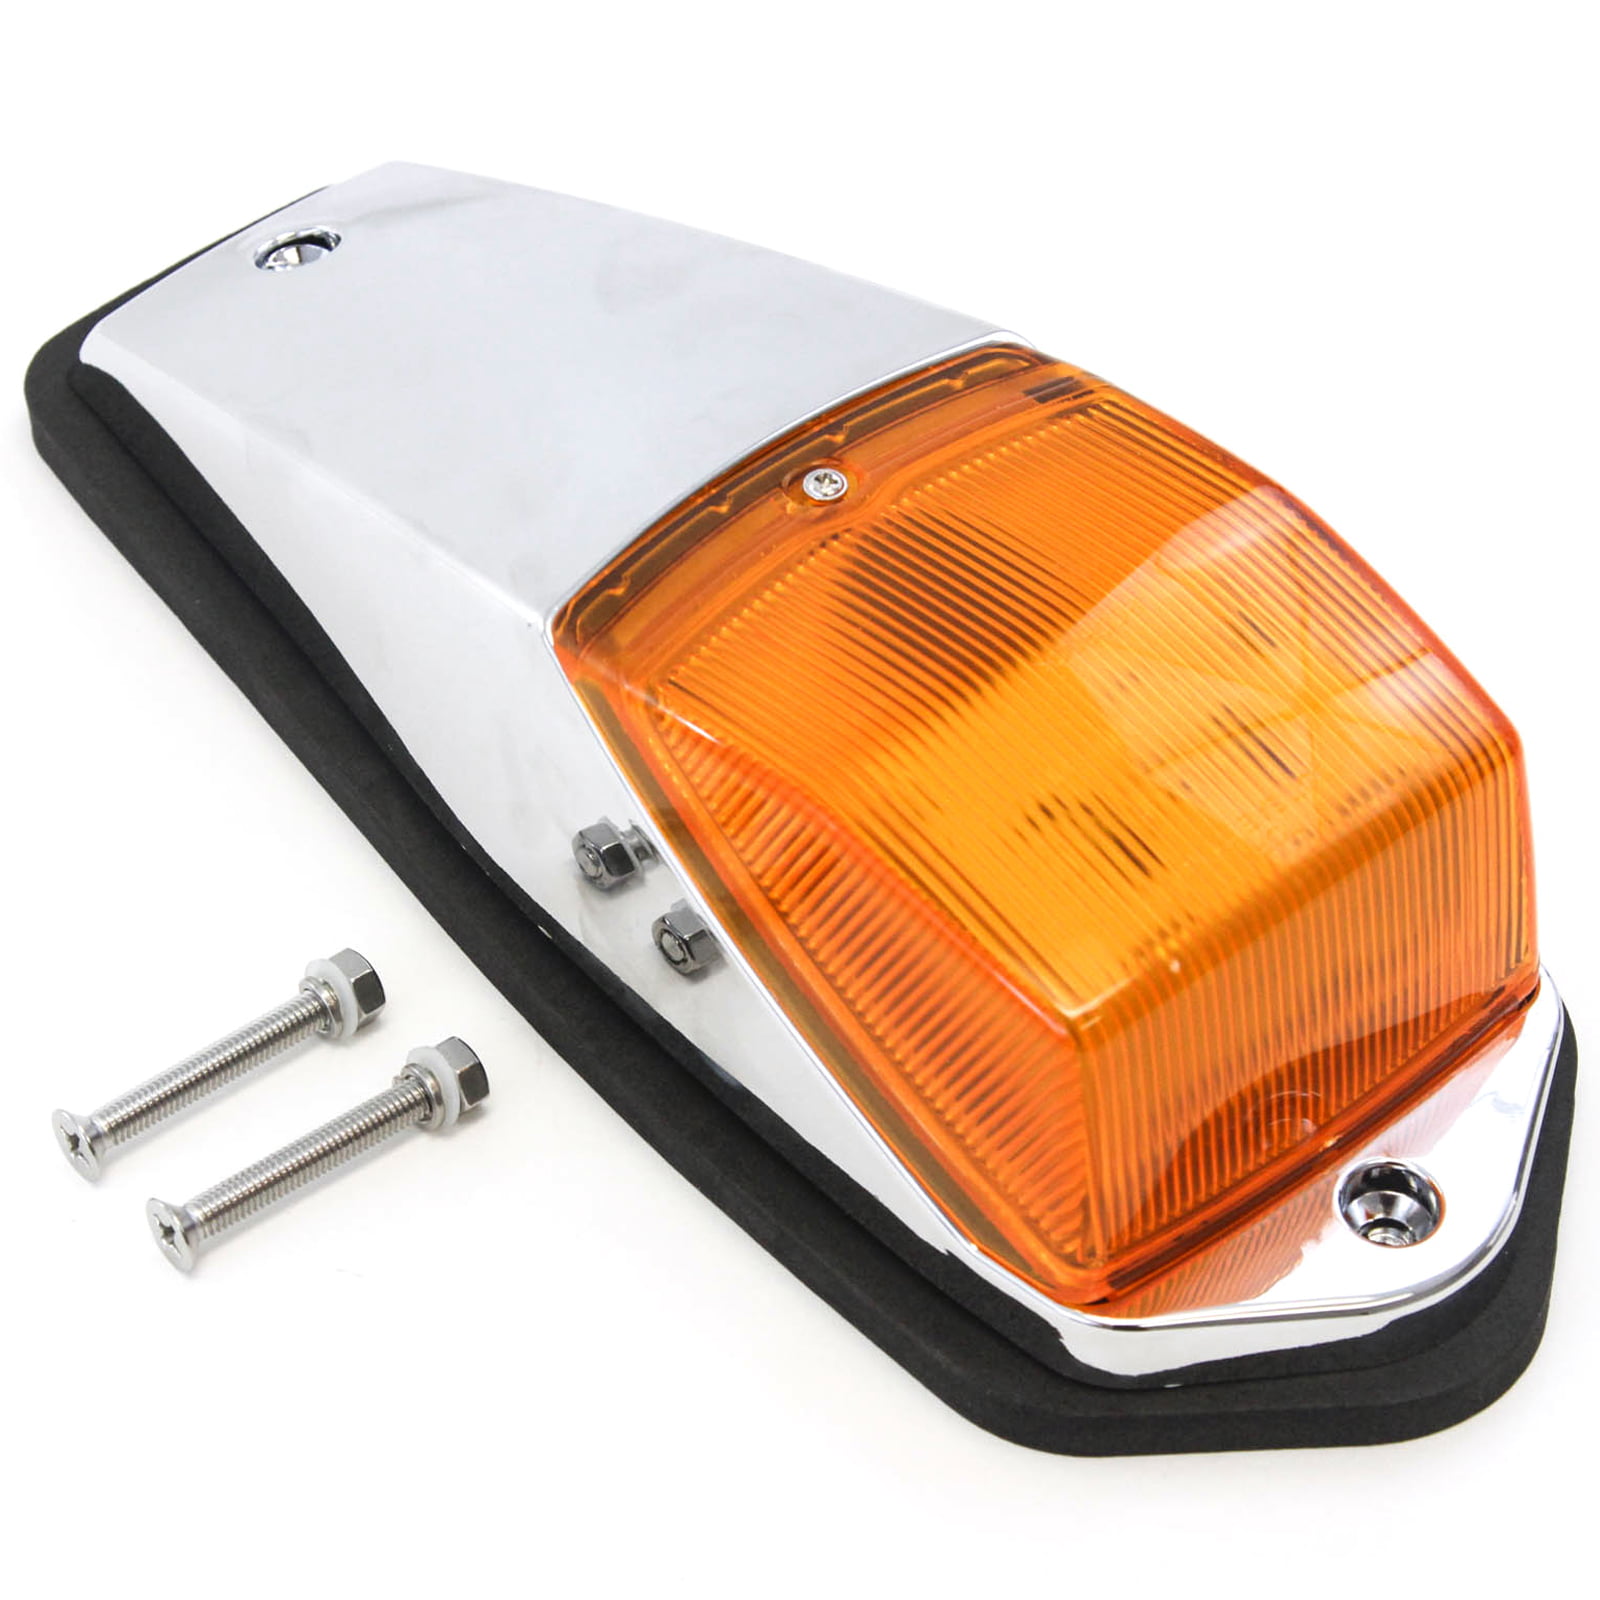 1 Cab Marker Light Chrome with 31 Ultra Bright LED Lamps Compatible with Peterbilt Kenworth